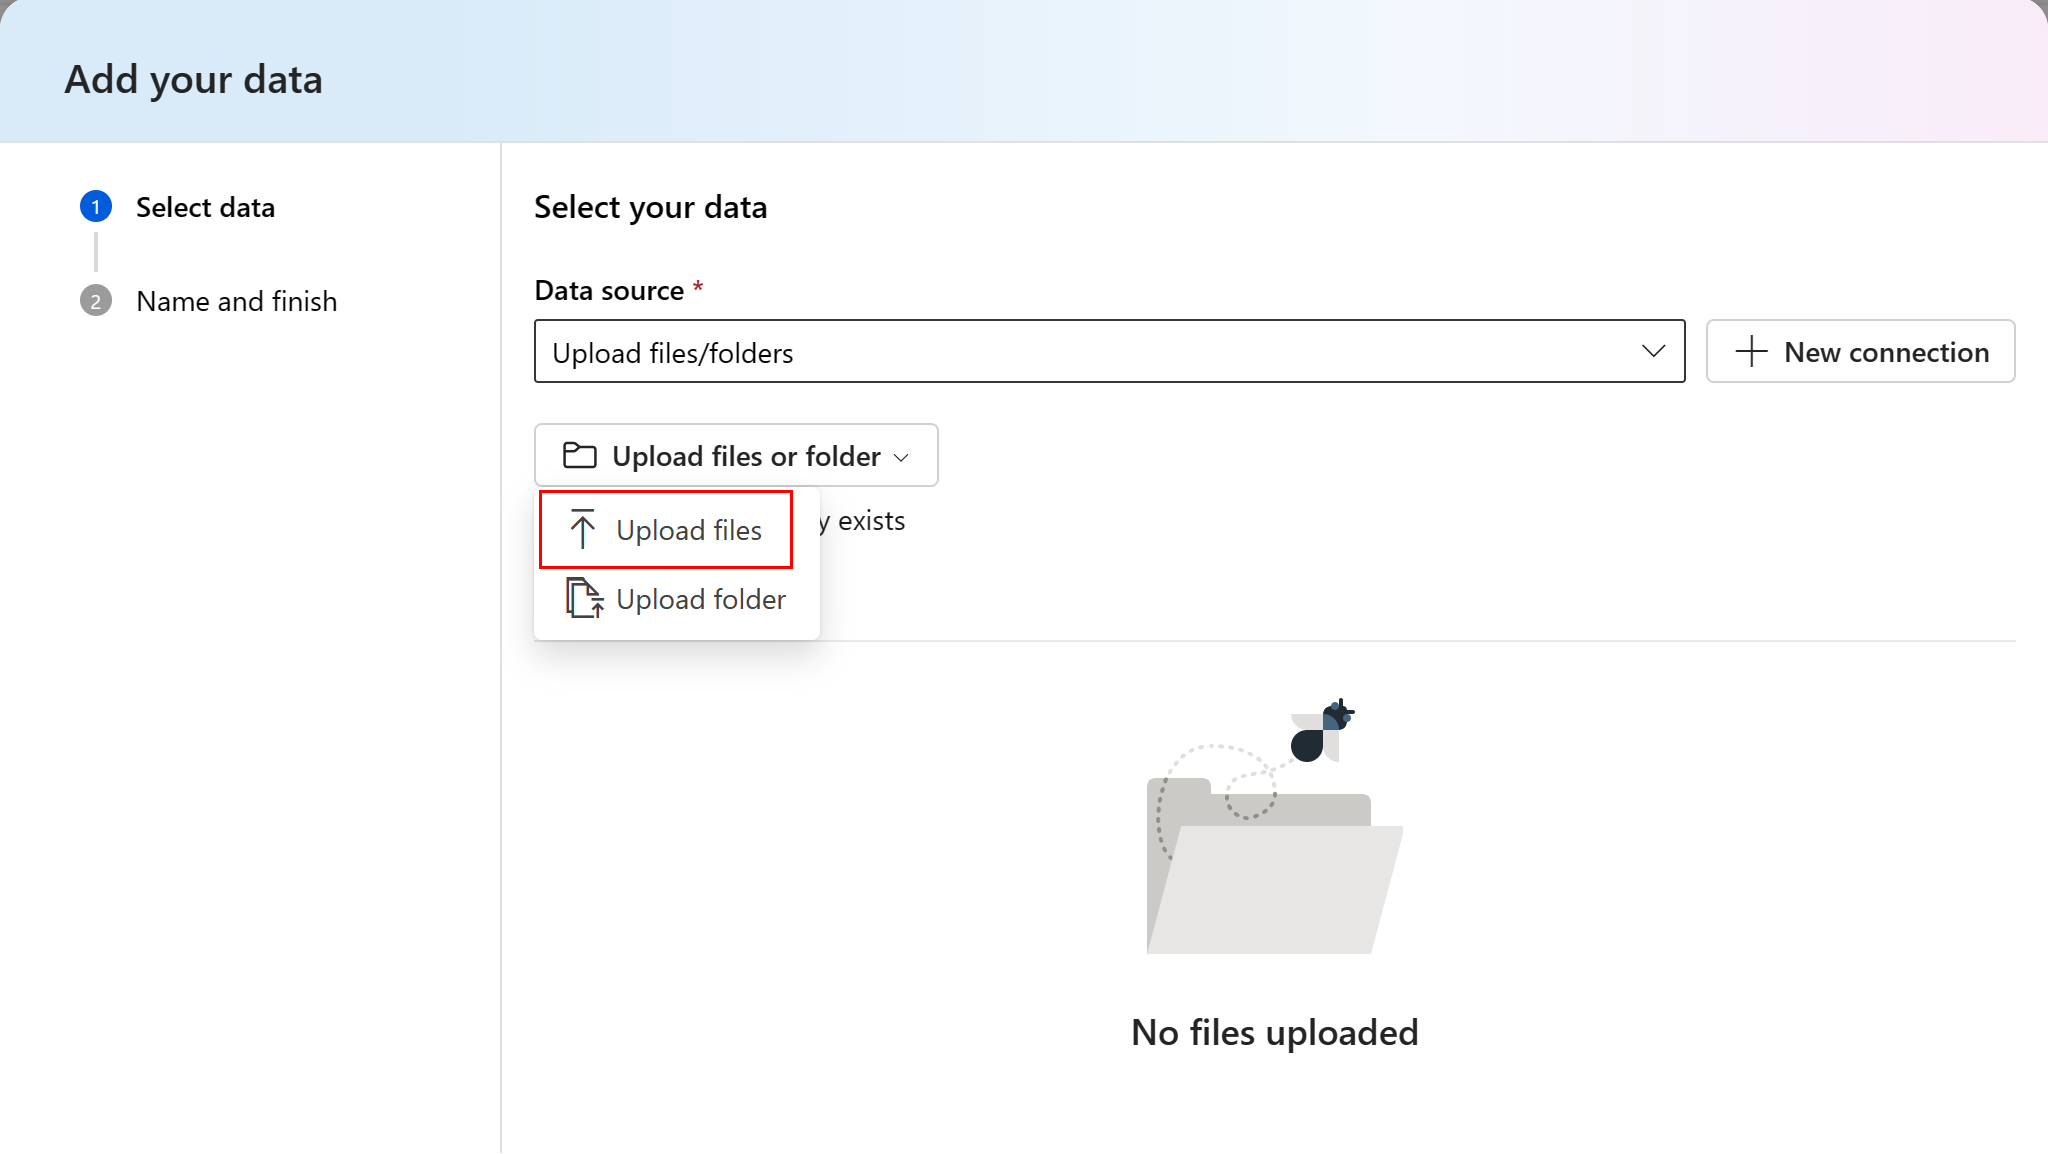 This screenshot shows the step to upload files/folders.